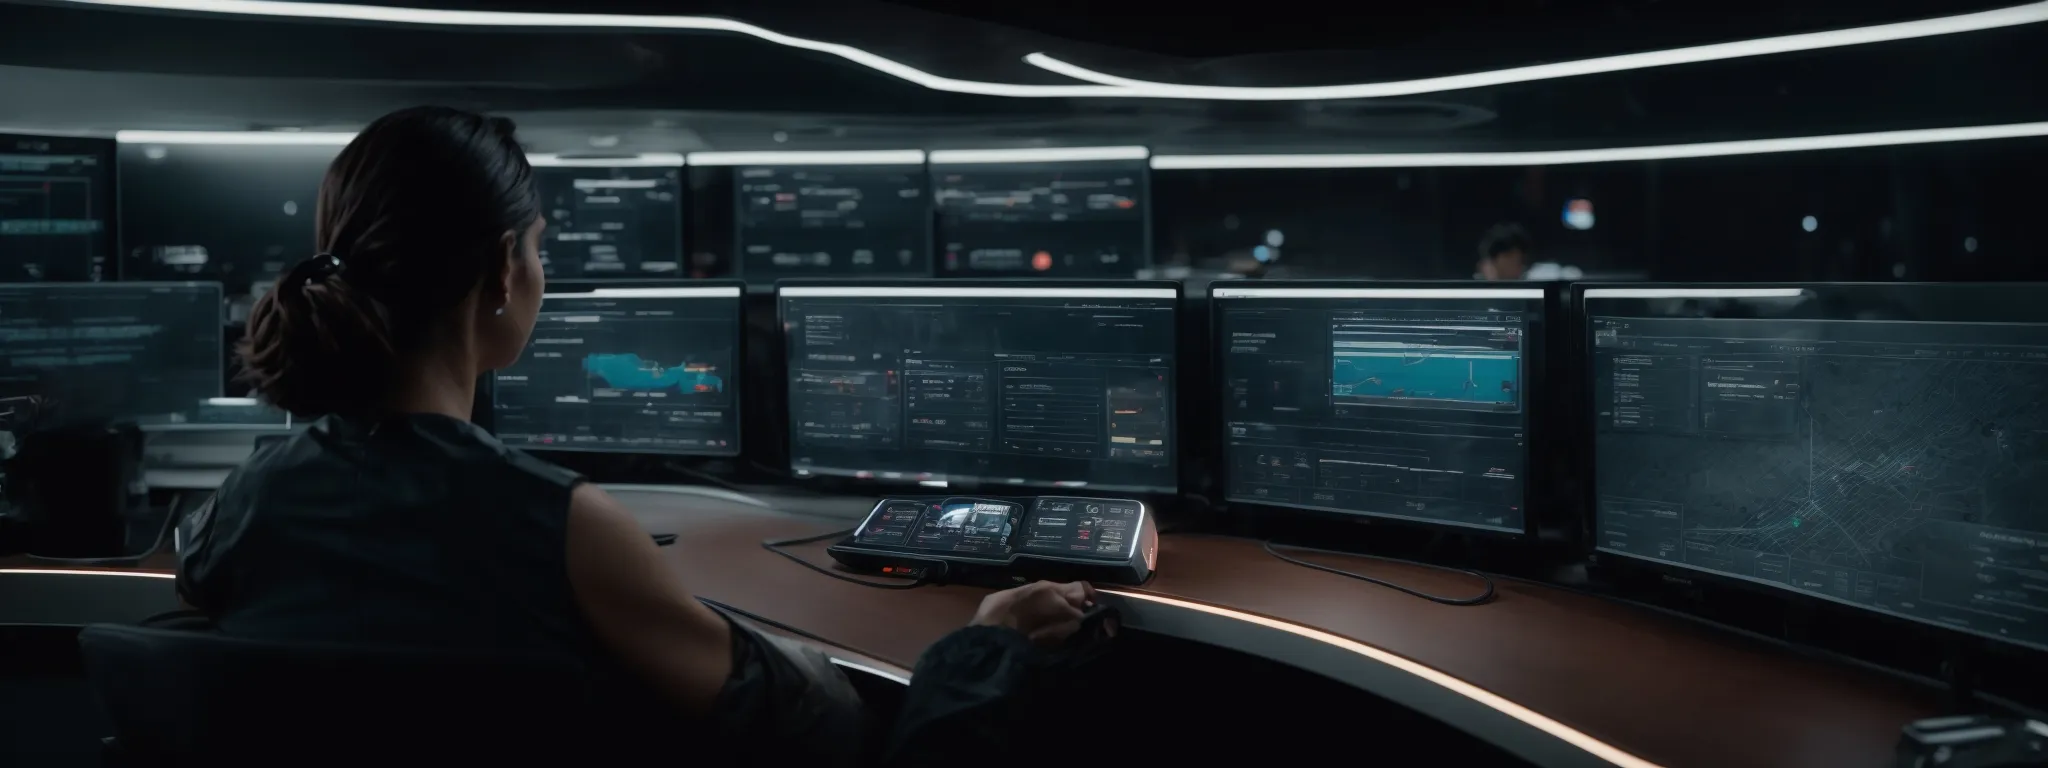 a user seamlessly interacts with a sleek, intuitive dashboard of a high-tech command center, illustrating the pinnacle of efficient digital navigation.